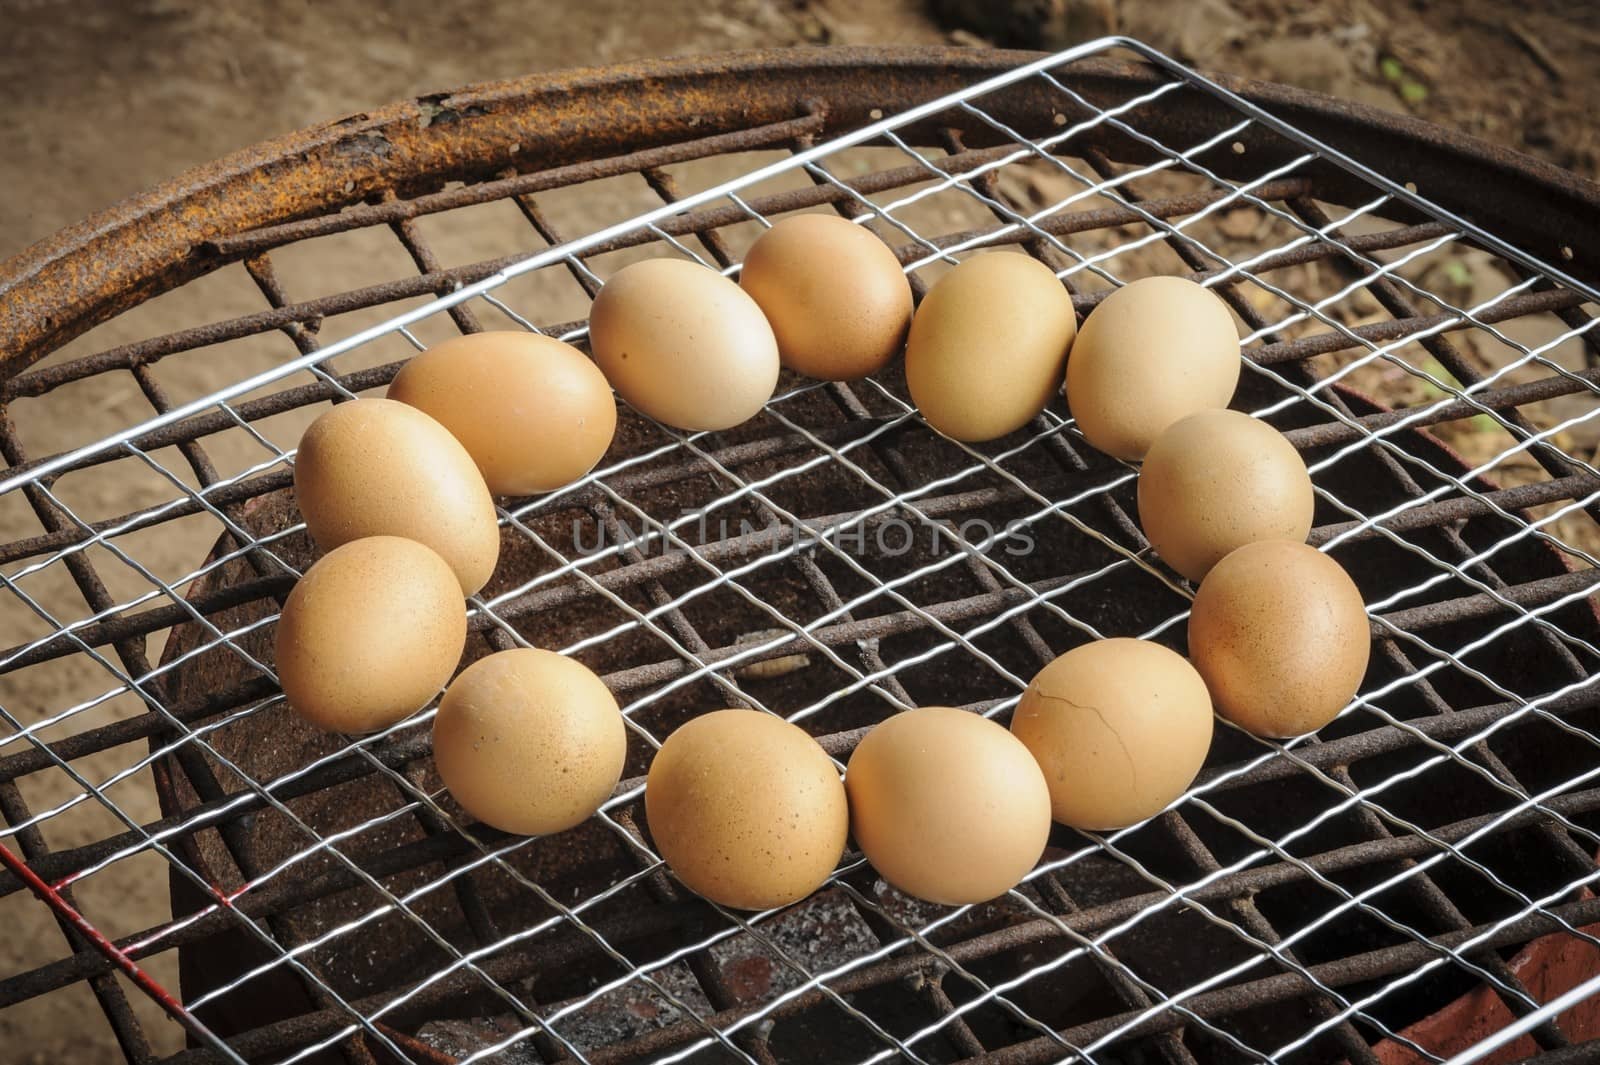 Chicken eggs Grilled over stove gridiron in local market.